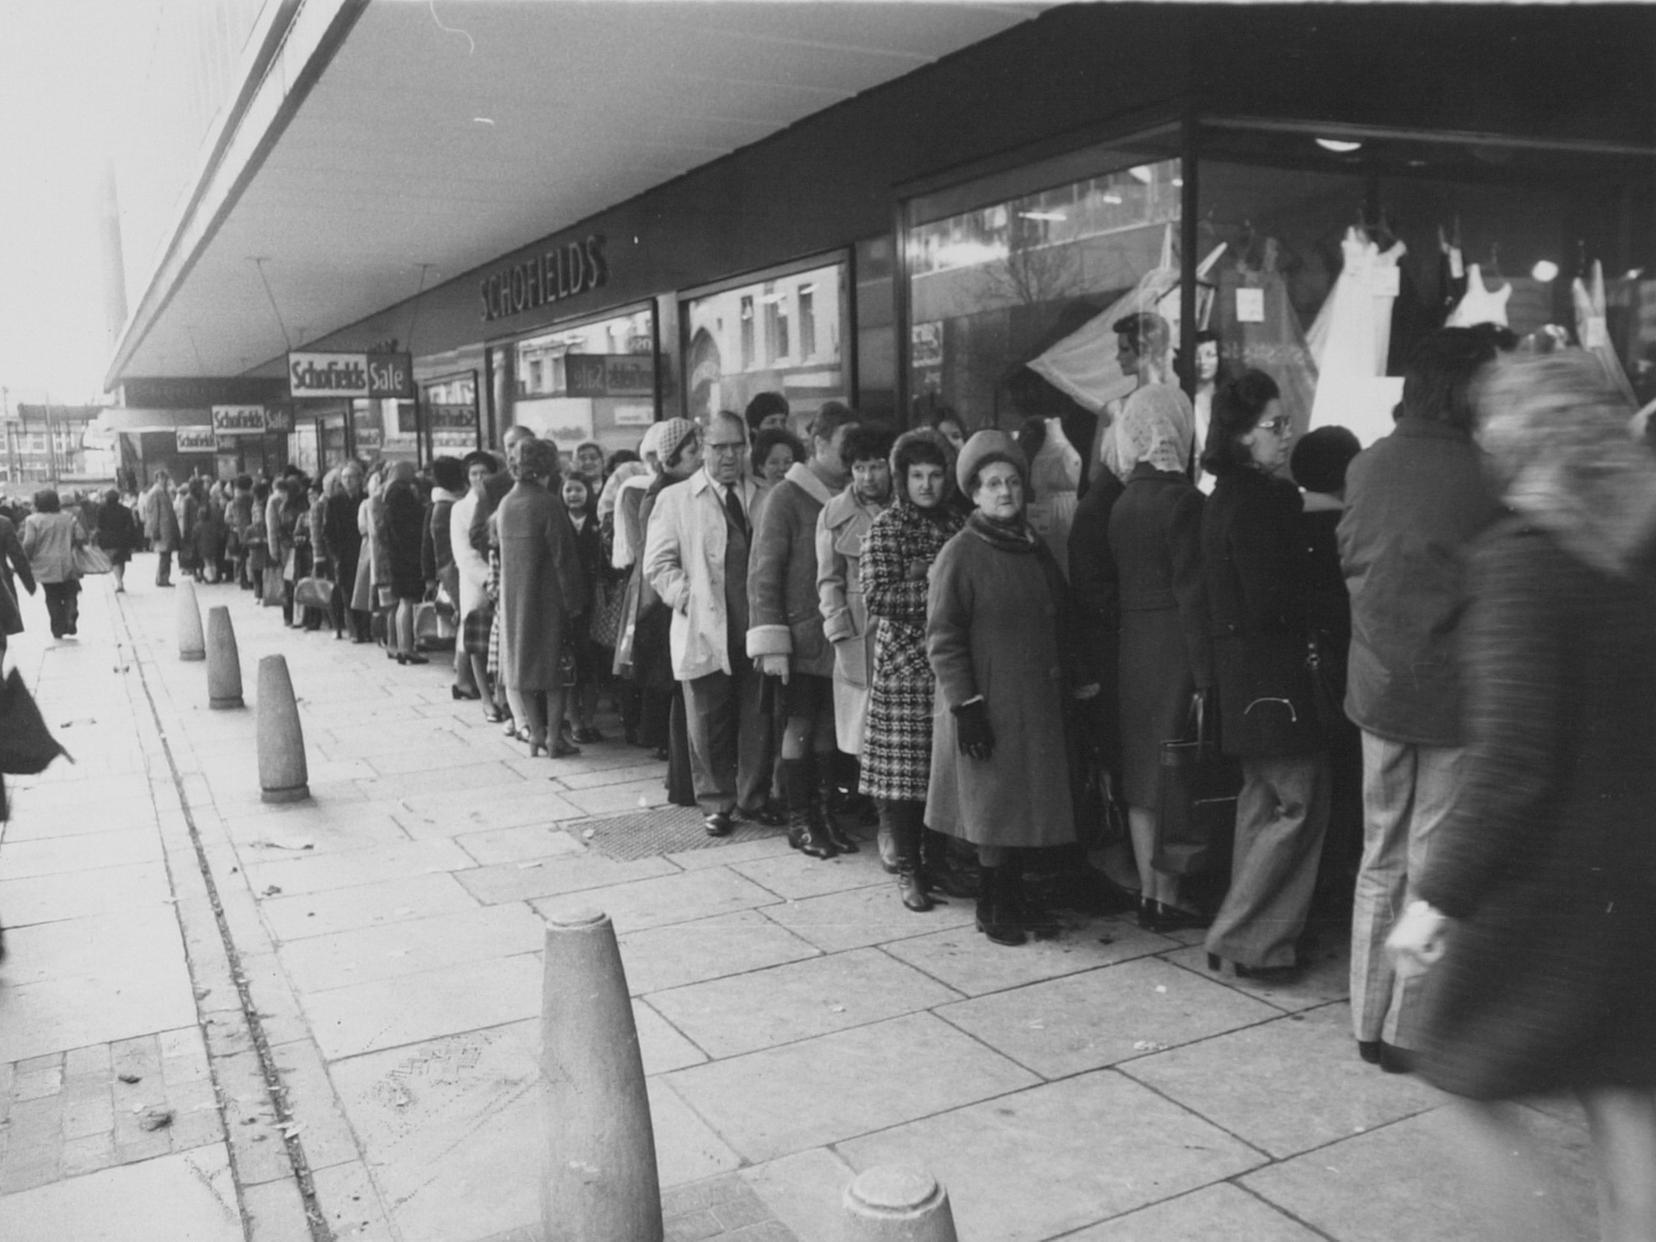 Part of a long queue for the January sales at Schofields in the mid-1970s.